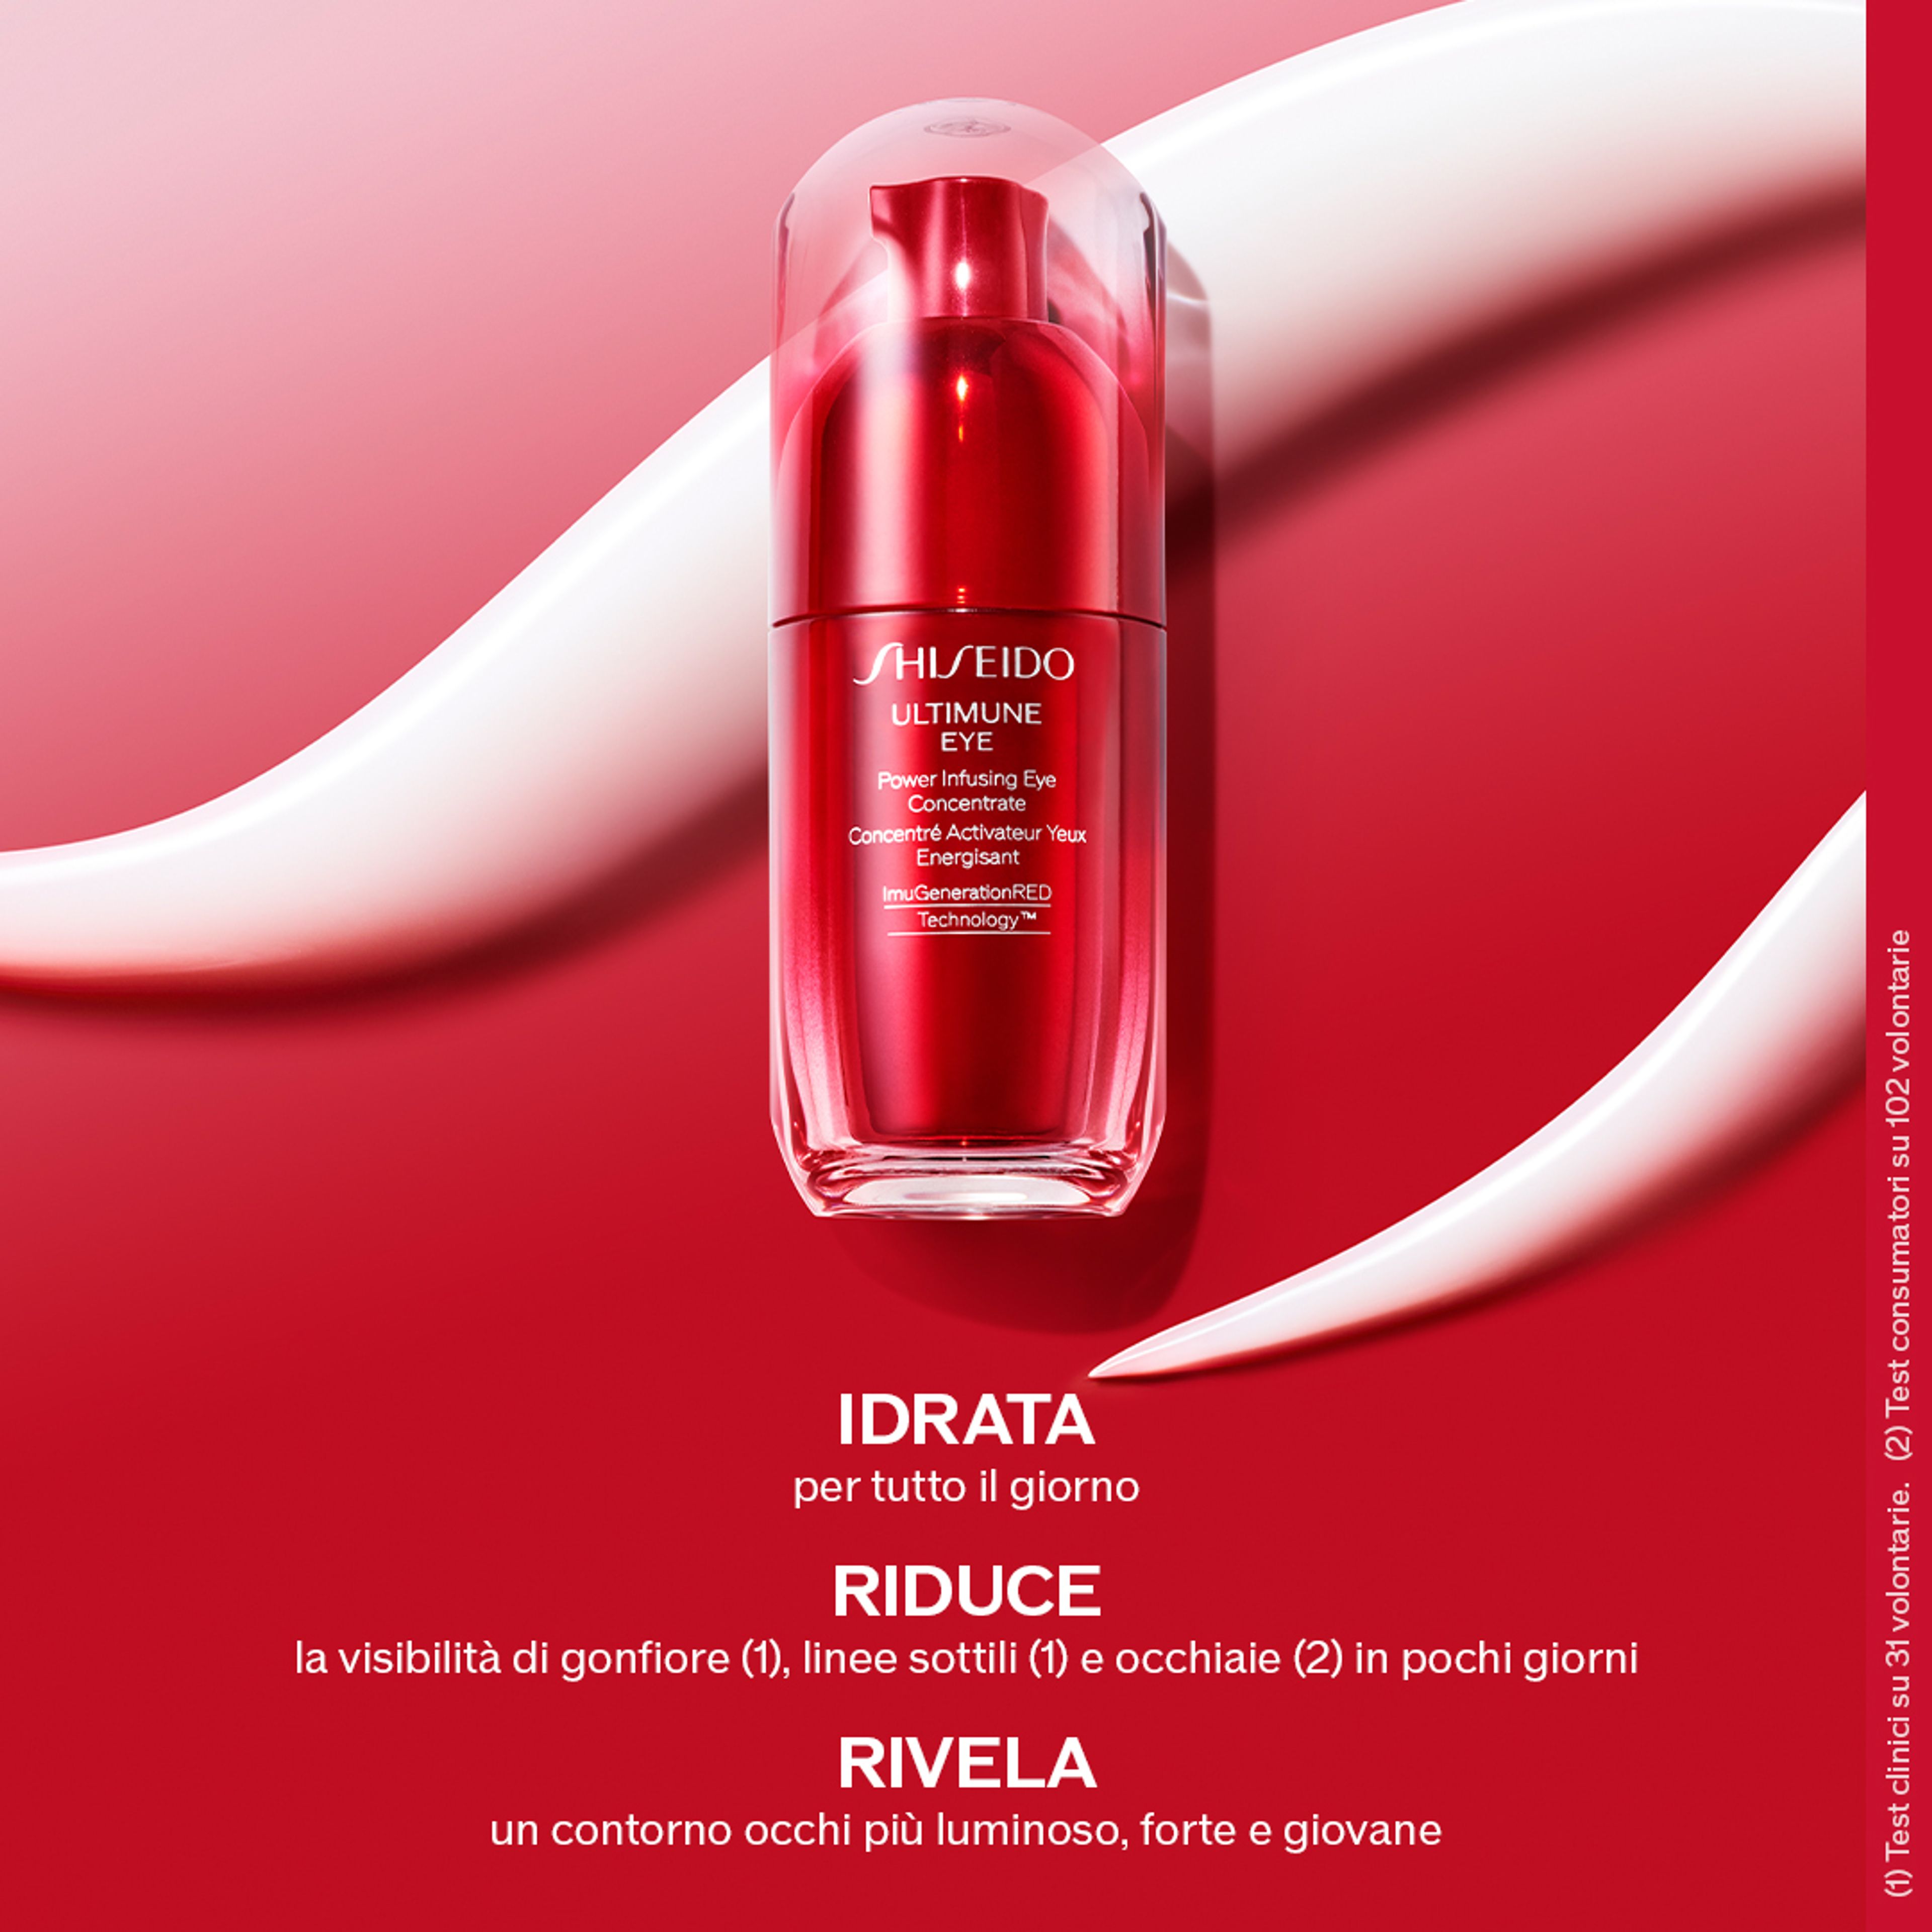 Shiseido Ultimune Power Infusing Eye Concentrate 2